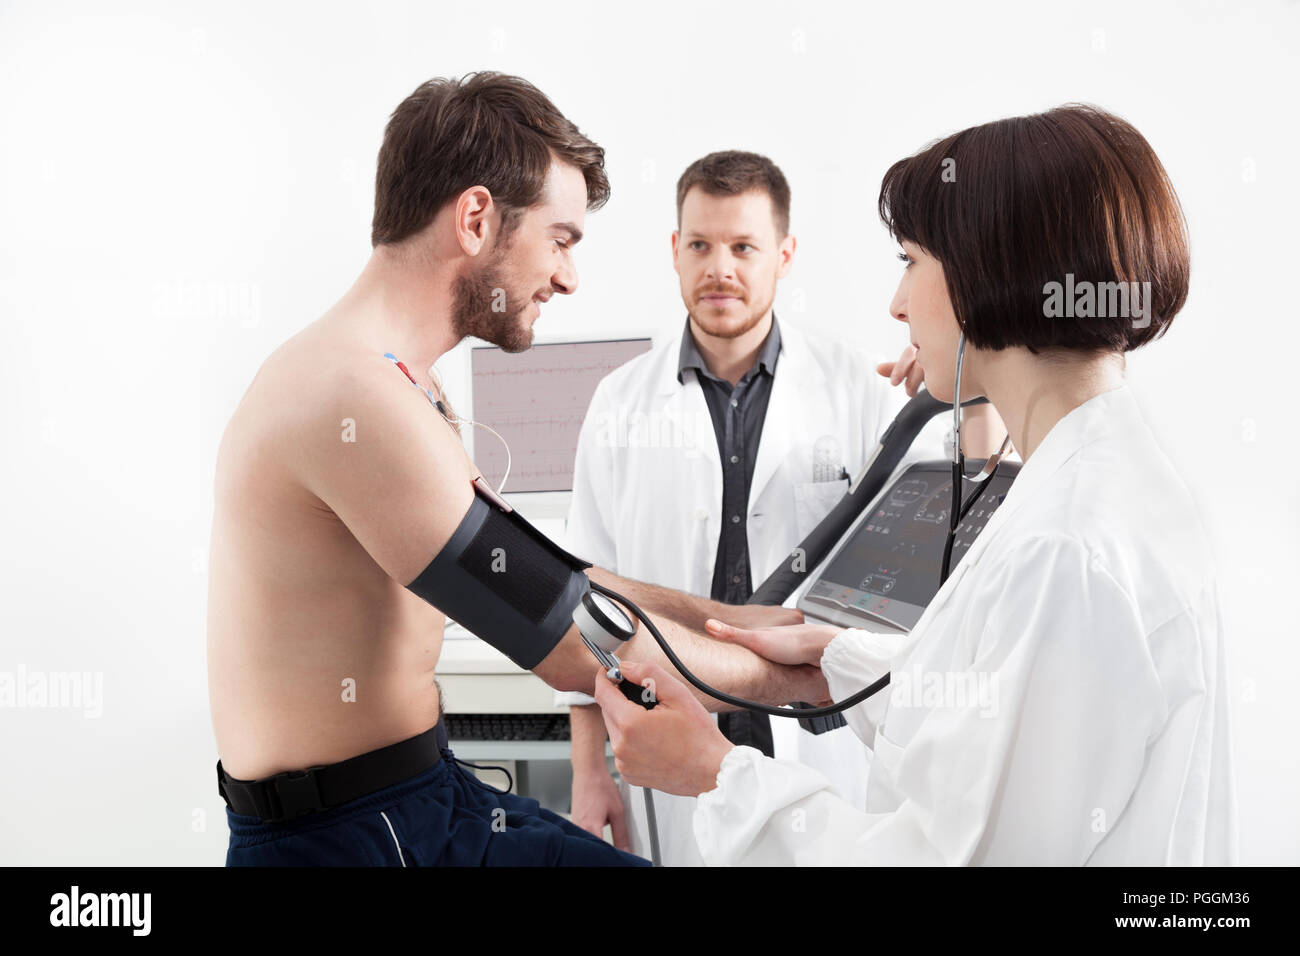 A male patient, pedaling on a bicycle ergometer stress test system for the function of his heart checked Stock Photo